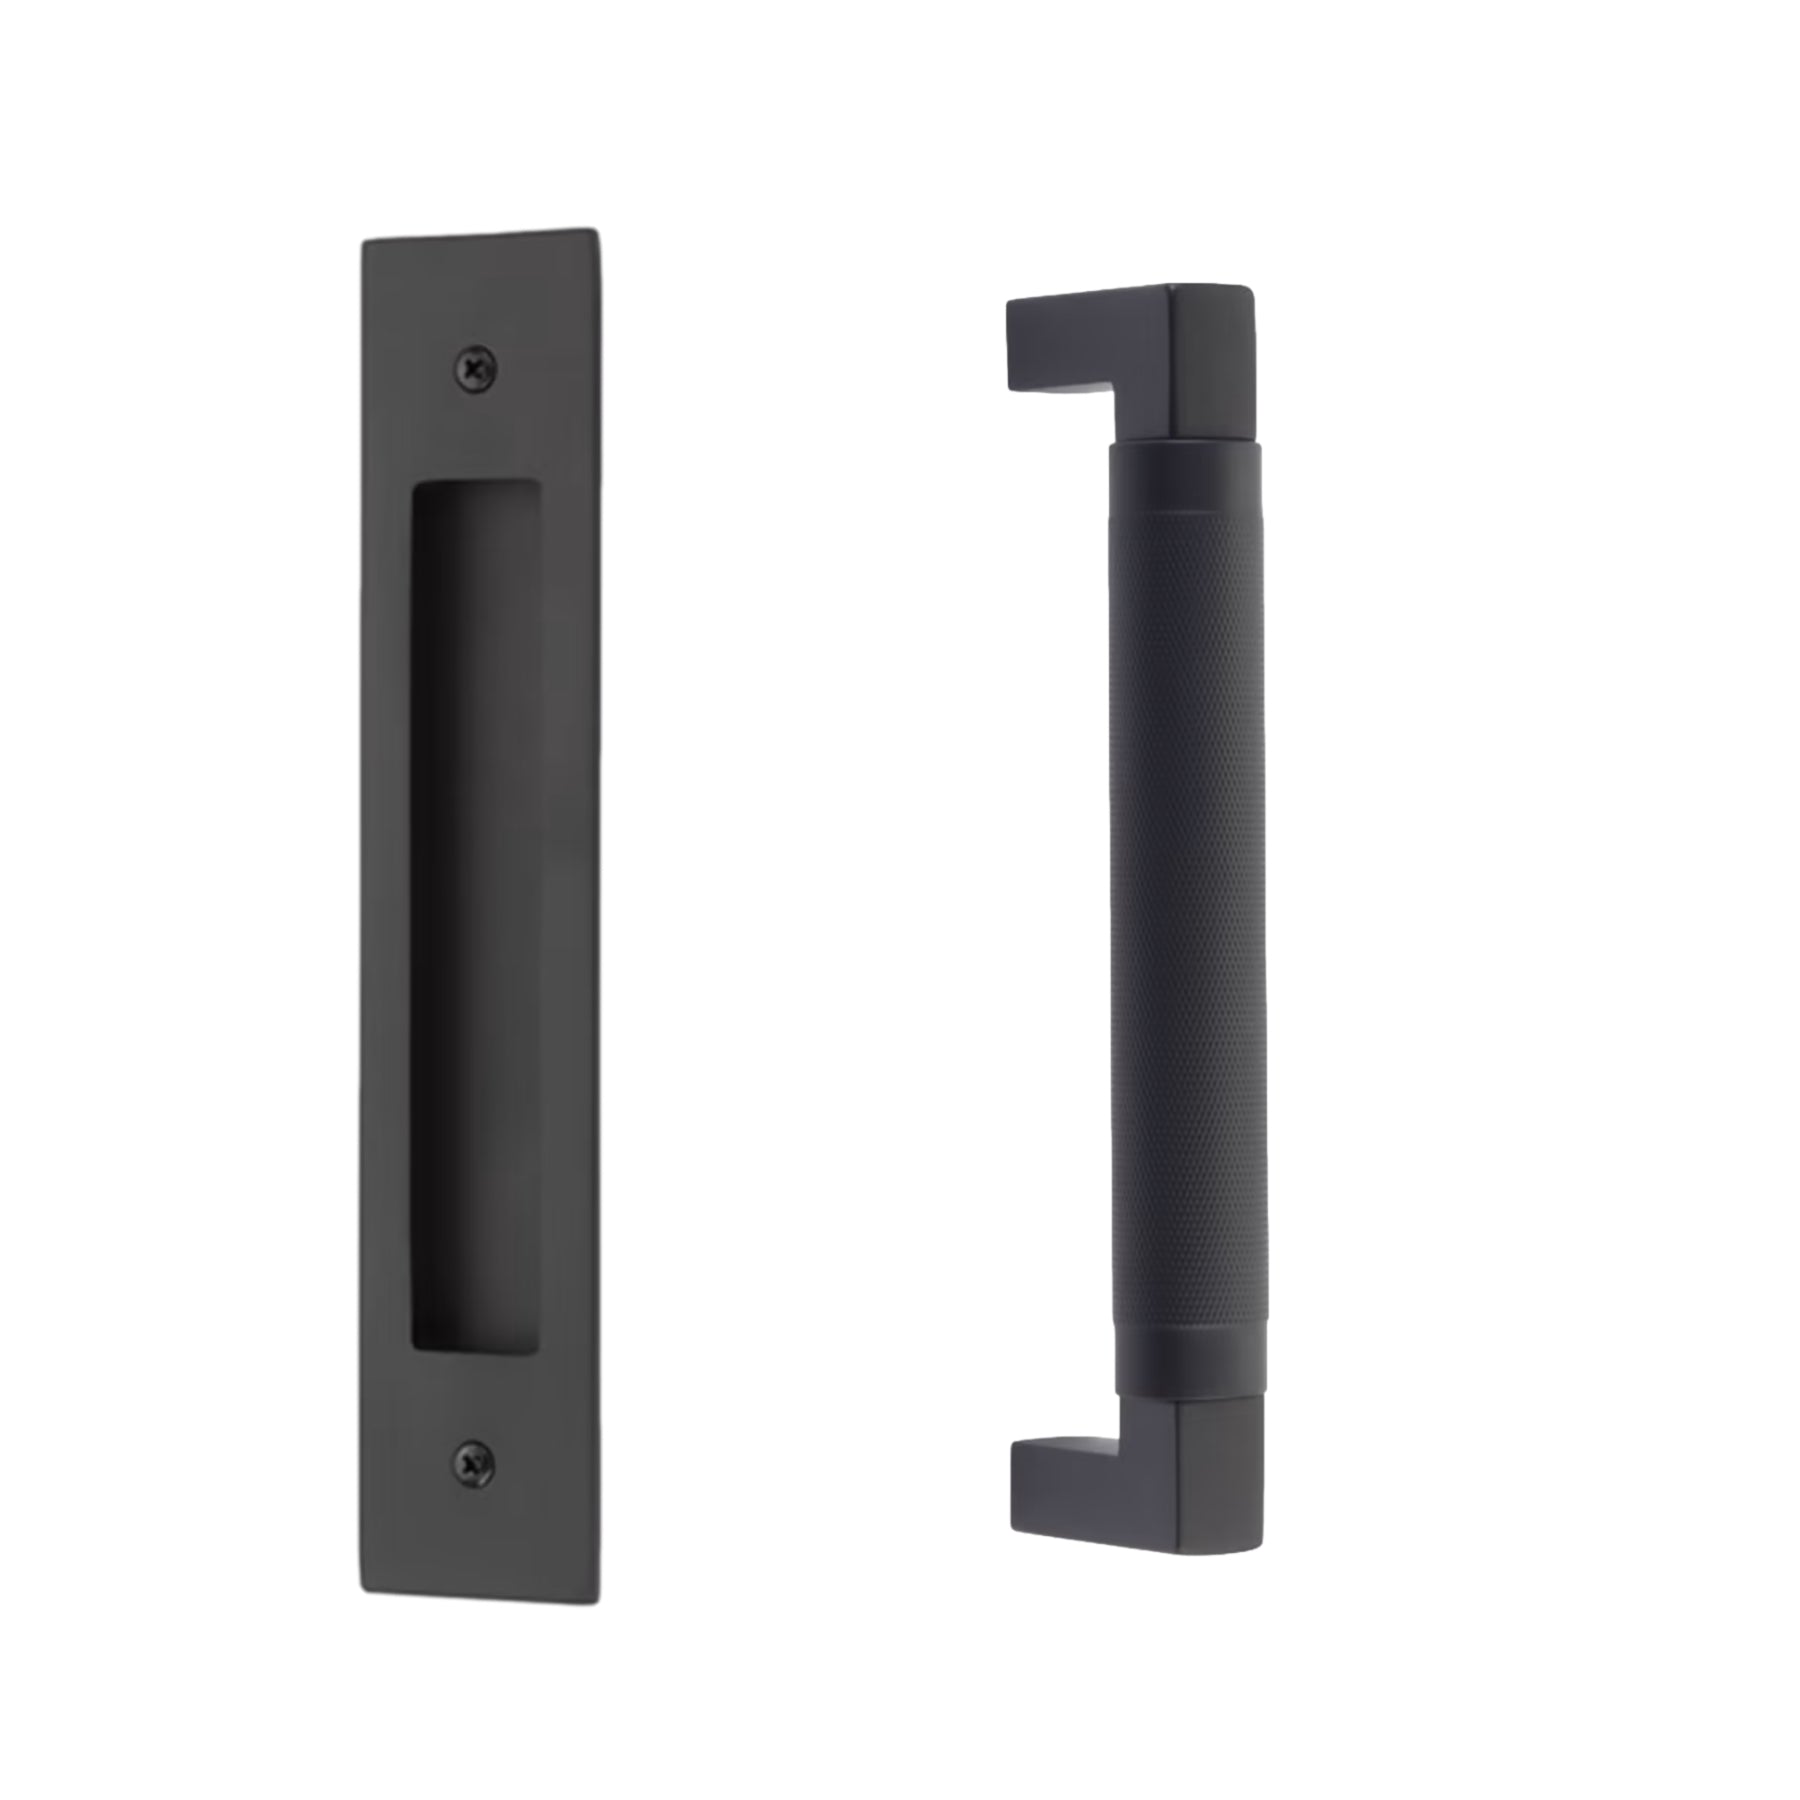 Door Flush Pull and Knurled Handle "Helix" Hardware for Interior Sliding Barn Doors in Matte Black